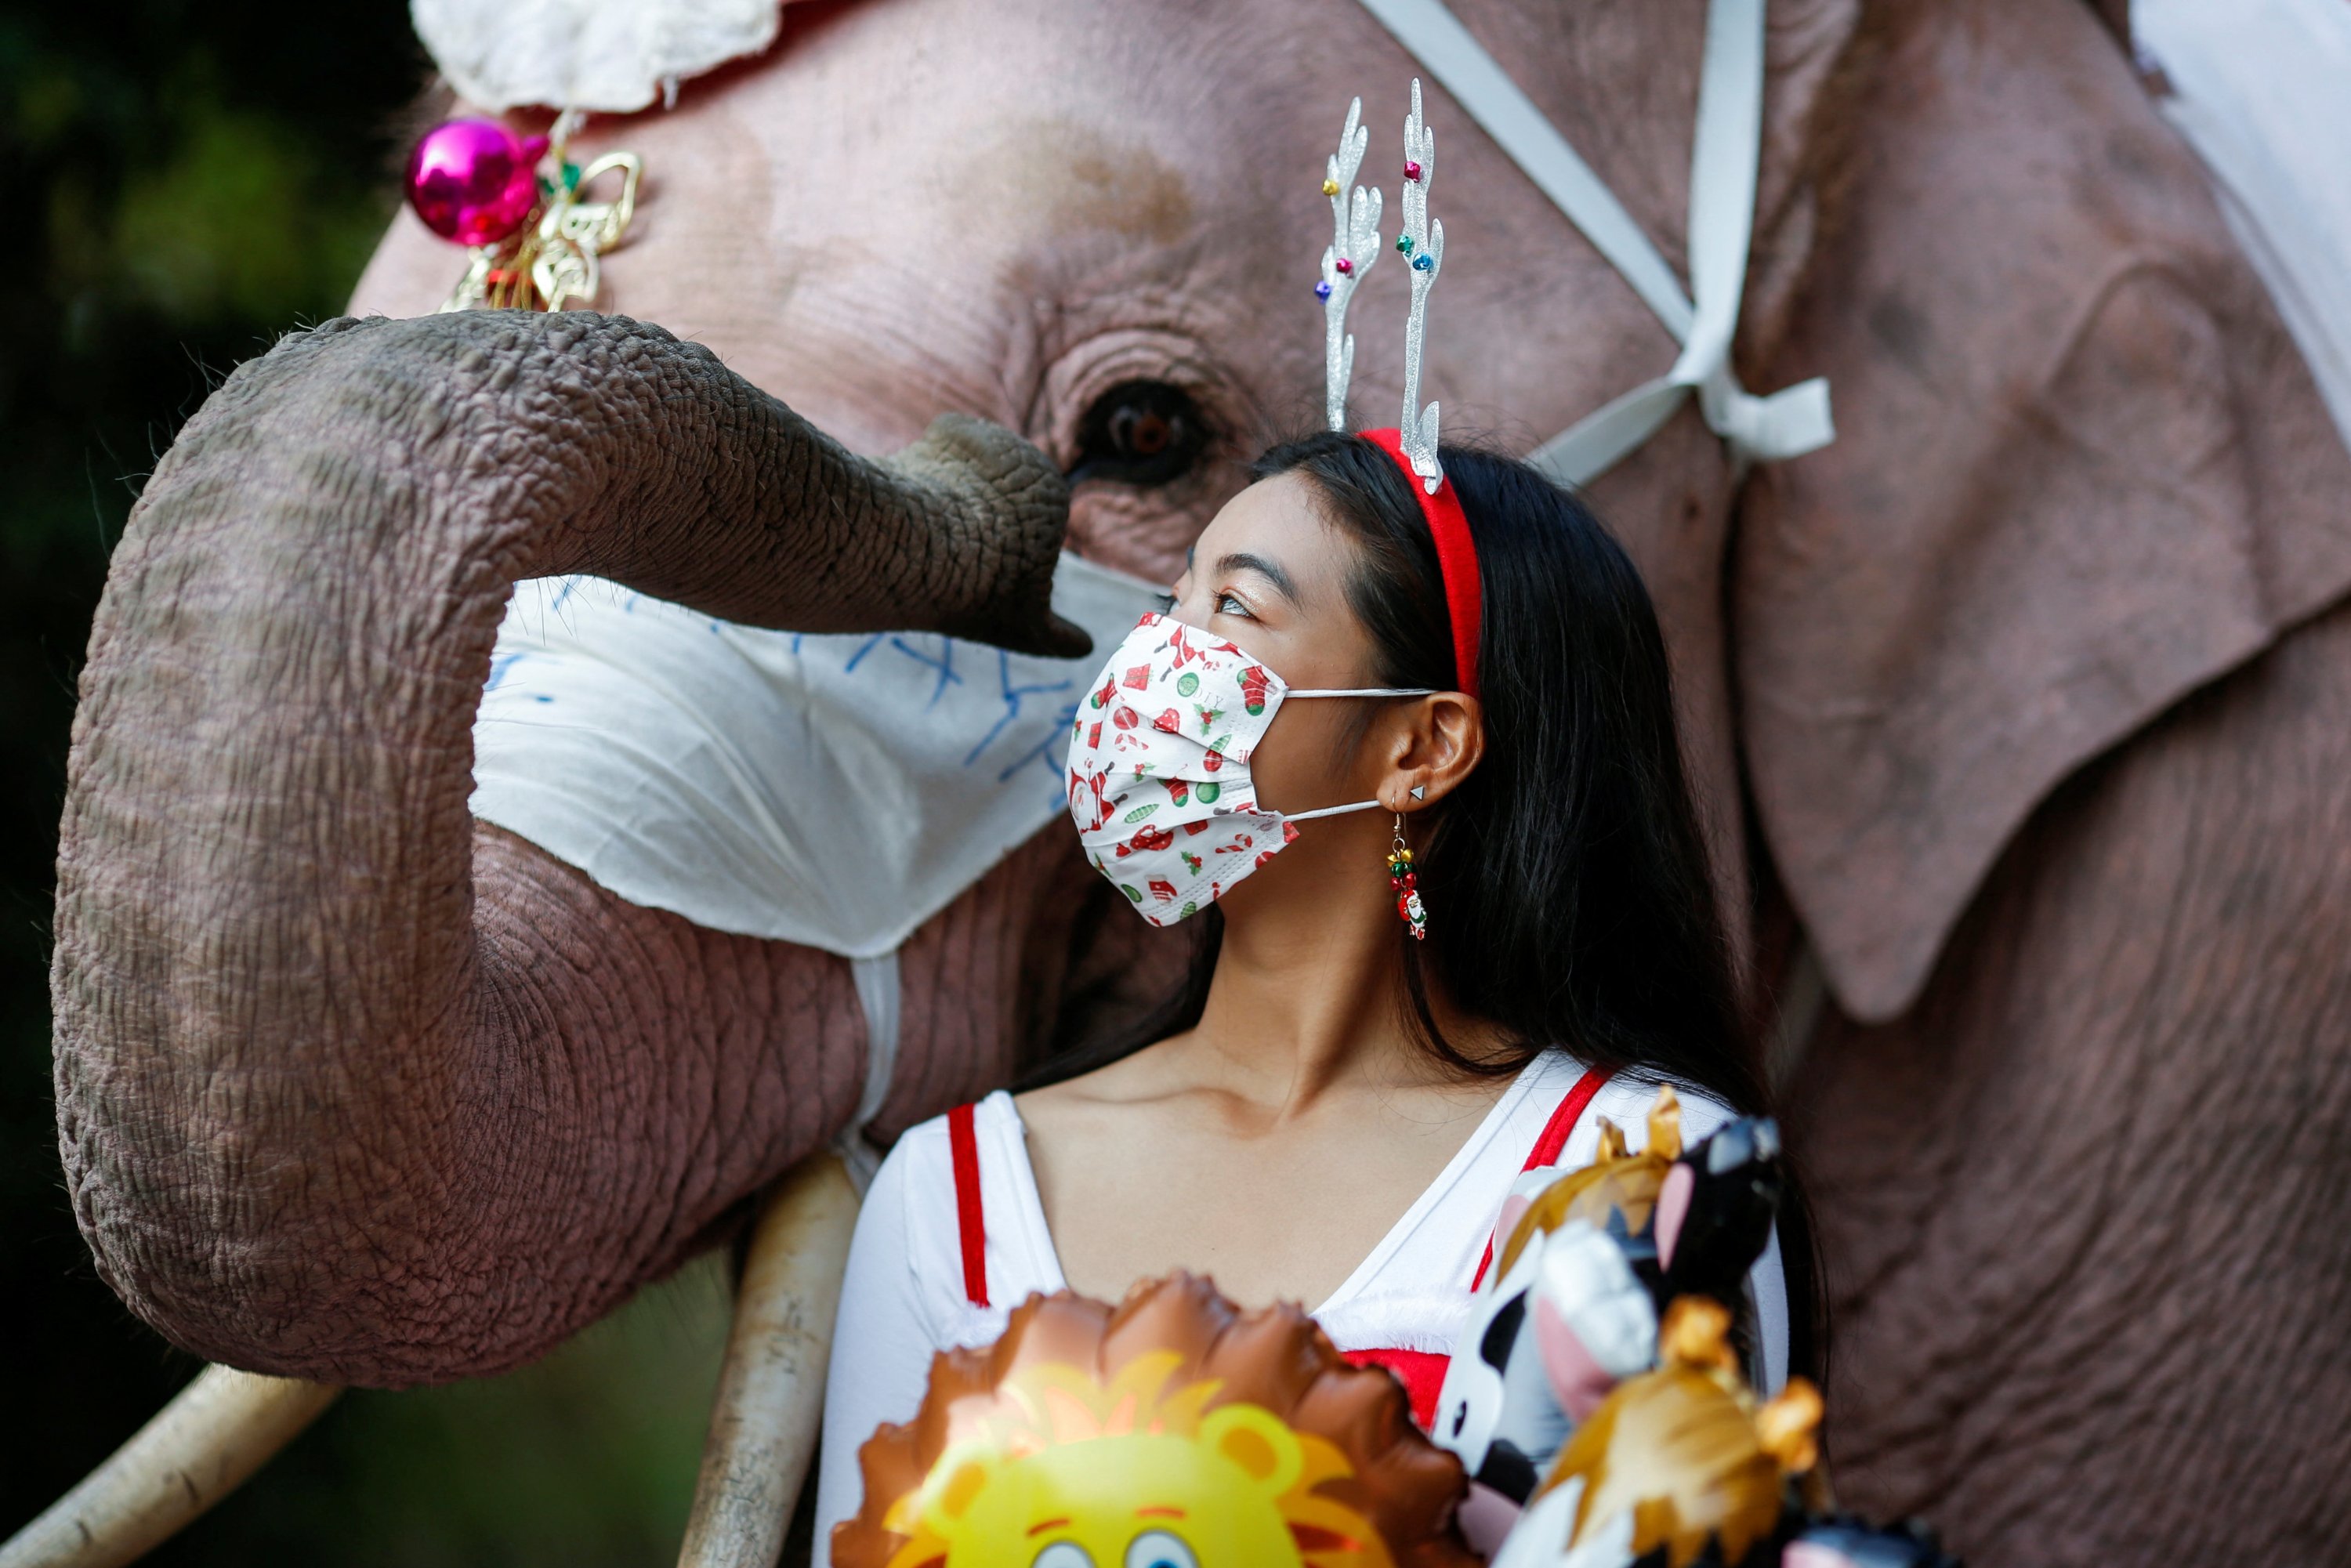 A girl stands near an elephant during the visit of five elephants in Santa Claus costumes with giant face masks, delivering hand sanitizers and promoting a "get vaccinated" message at a primary school, in the historical city of Ayutthaya, Thailand, December  24, 2021. (Reuters Photo)